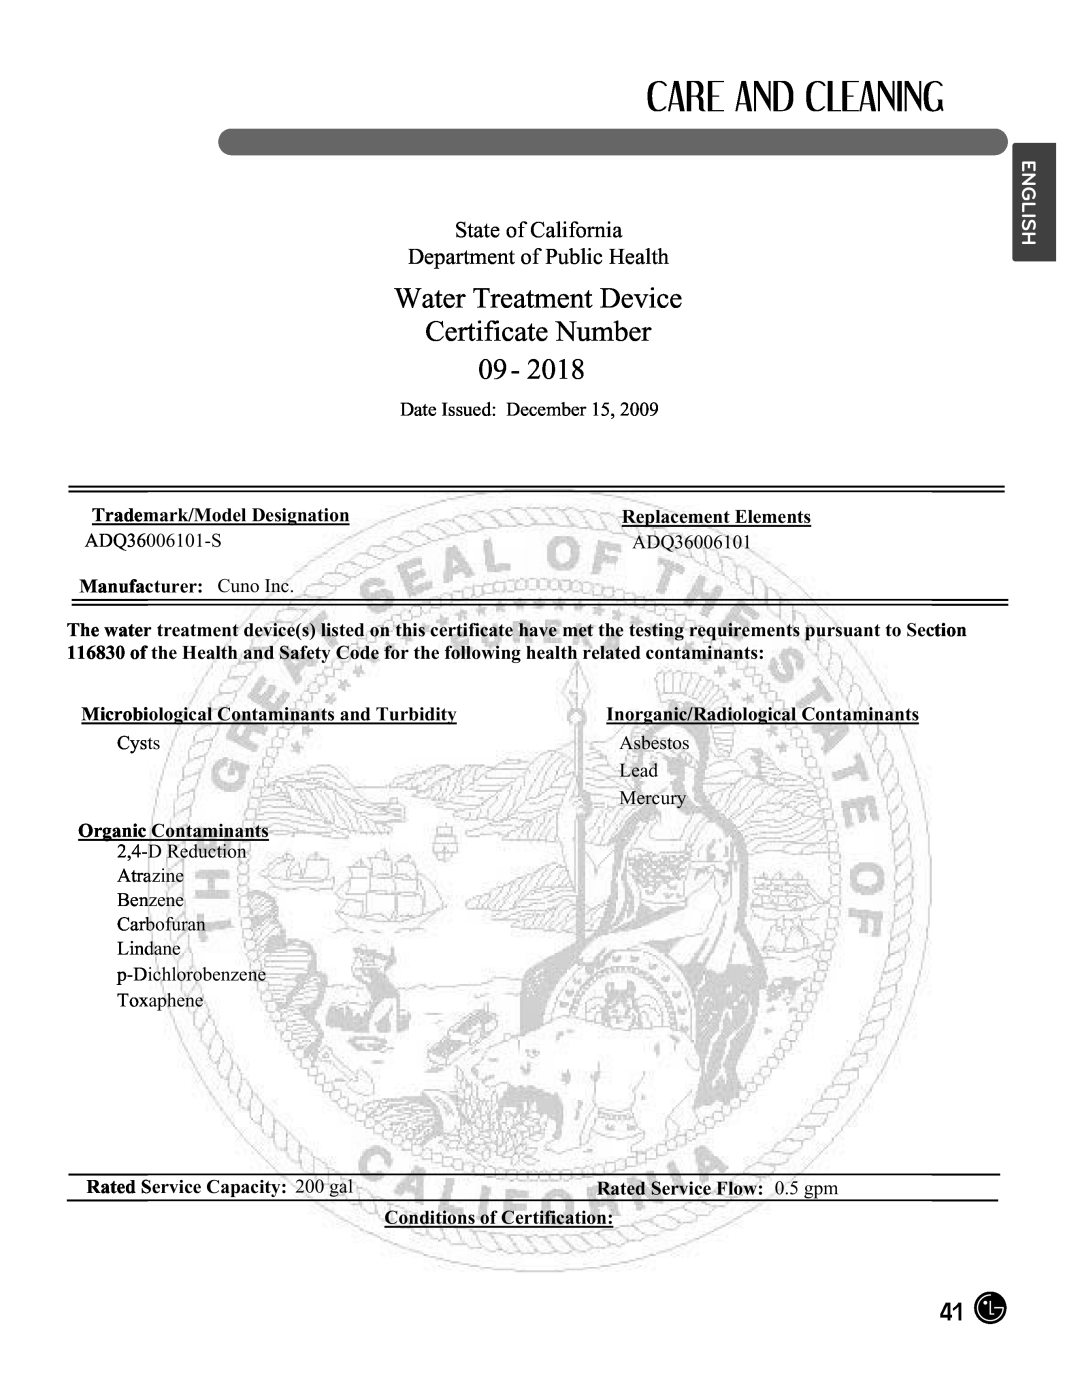 LG Electronics LMX25988ST Water Treatment Device Certificate Number, State of California Department of Public Health 